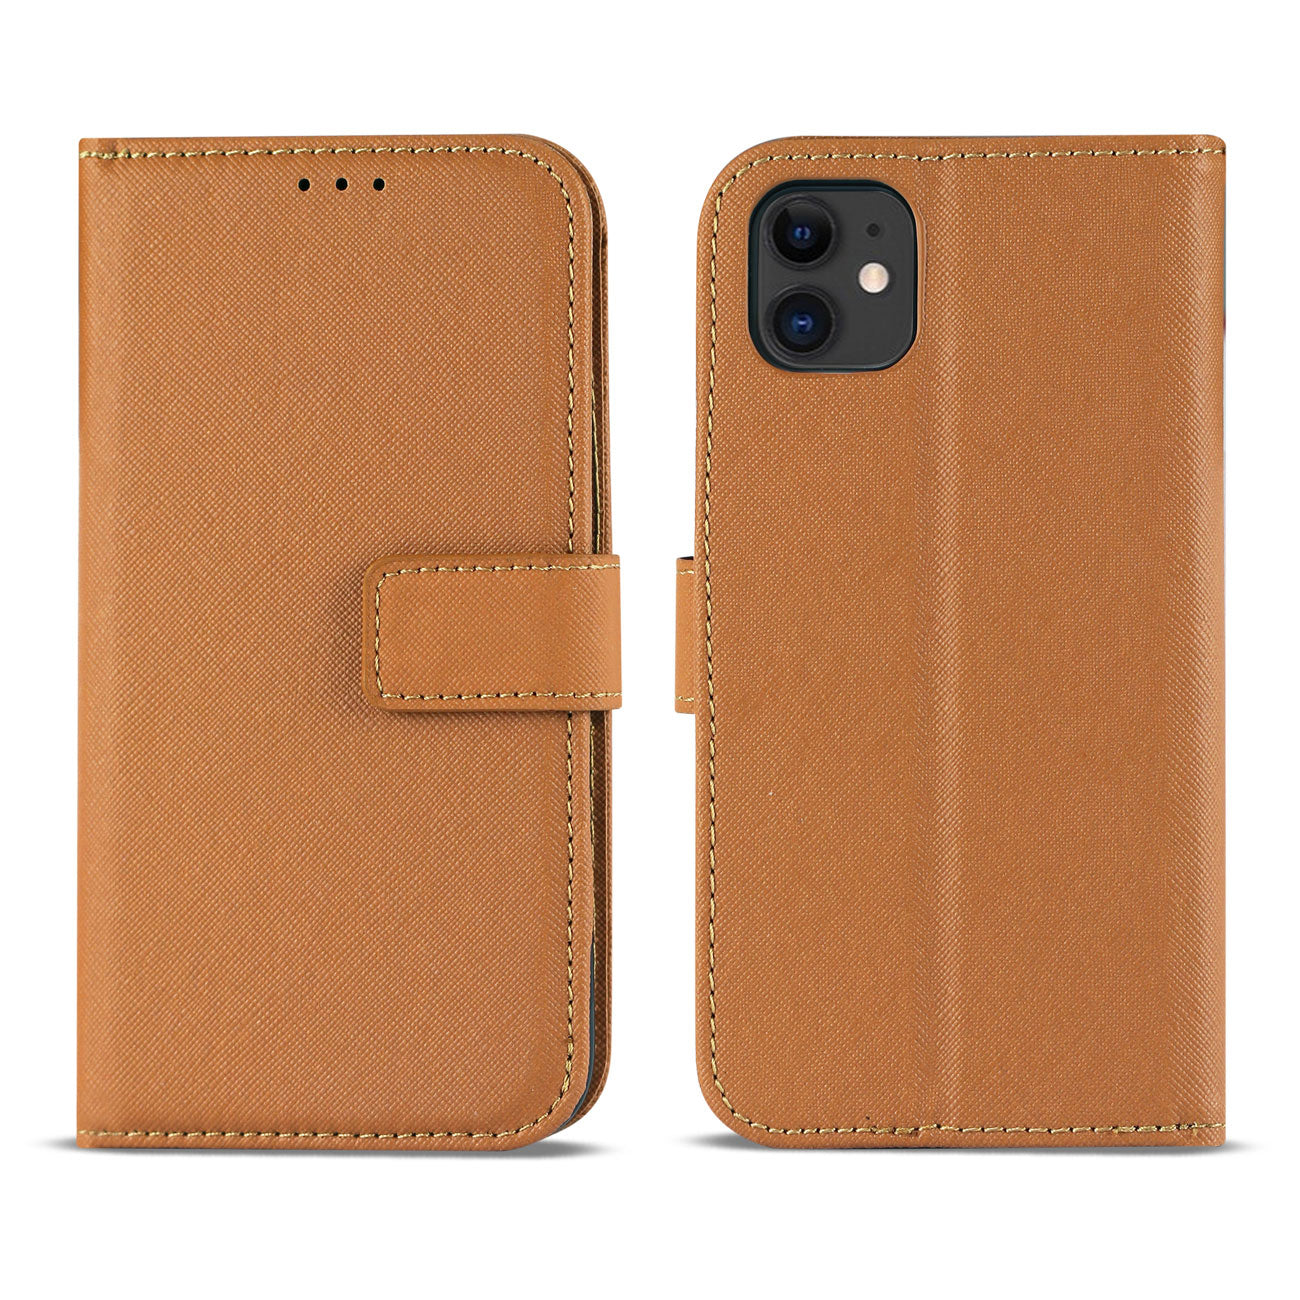 Case Slim Stand With Card Slots Apple iPhone 12 Mini Brown Color